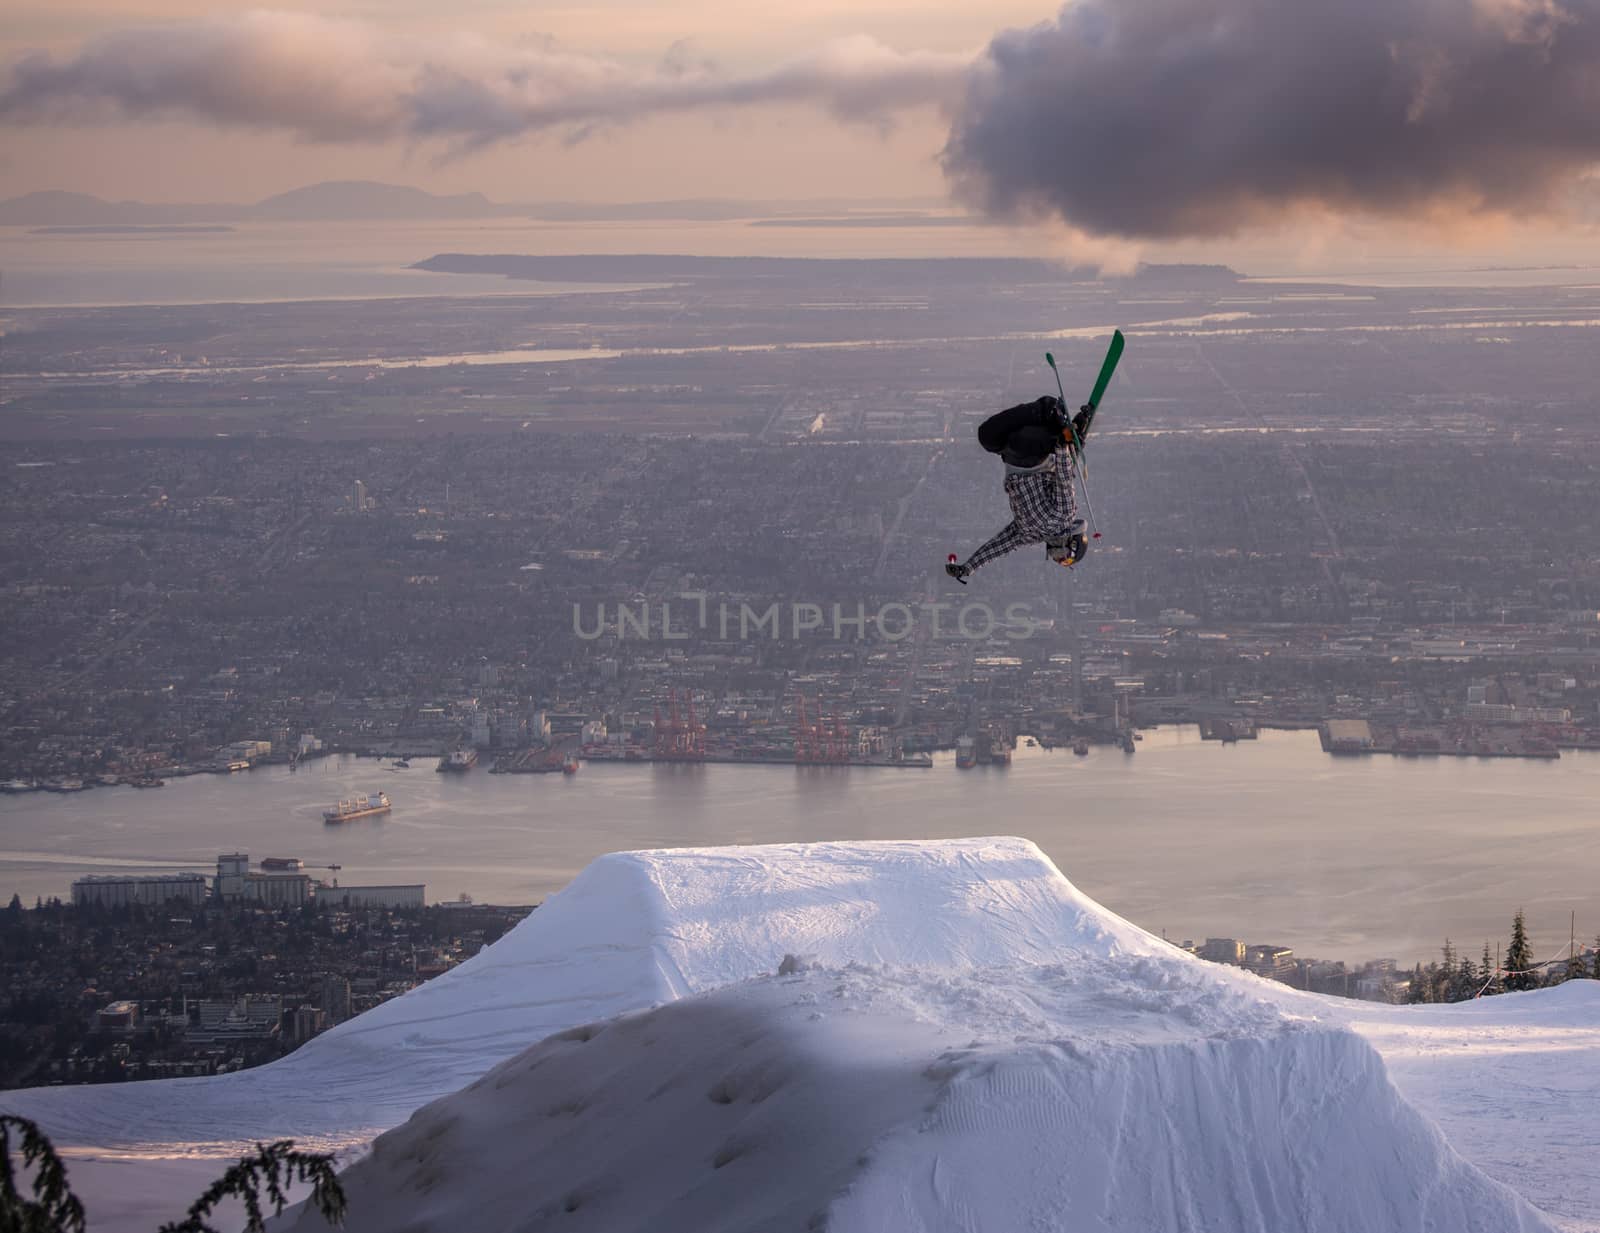 Freestyle skier performs backflip mute grab on jump over city